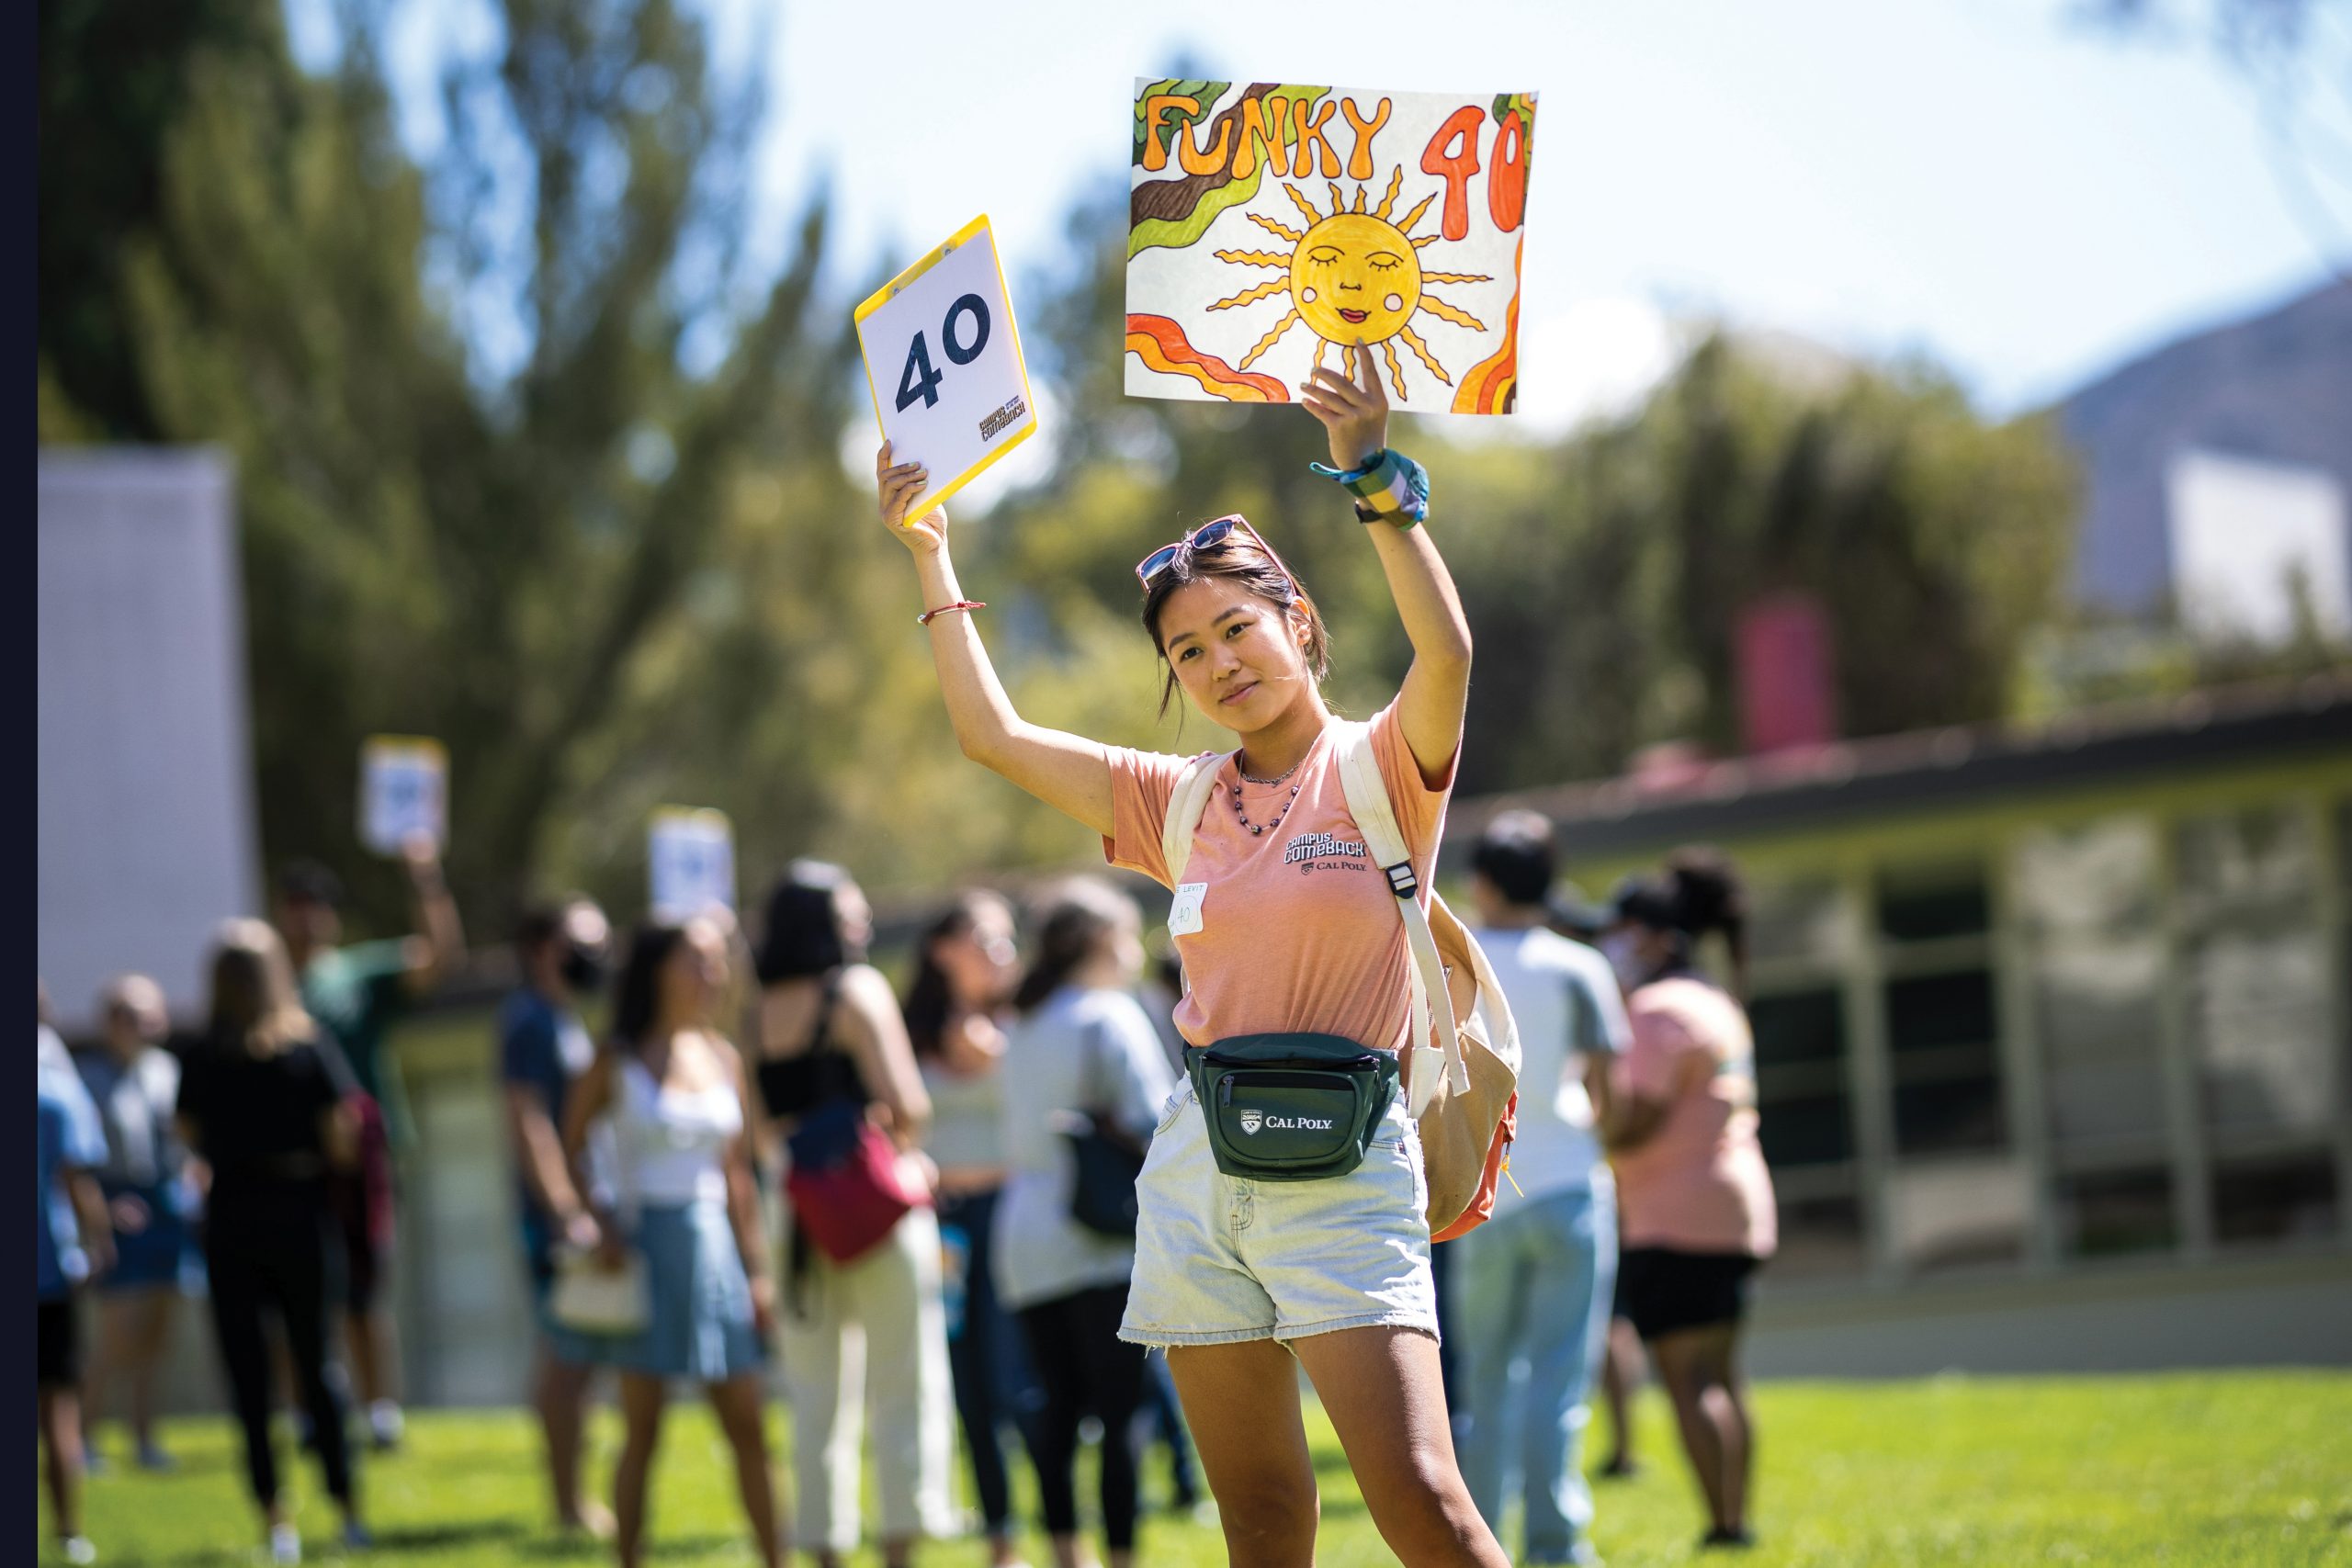 A young woman in a pink shirt holds up signs that say "40" and "funky 40" on a green campus lawn